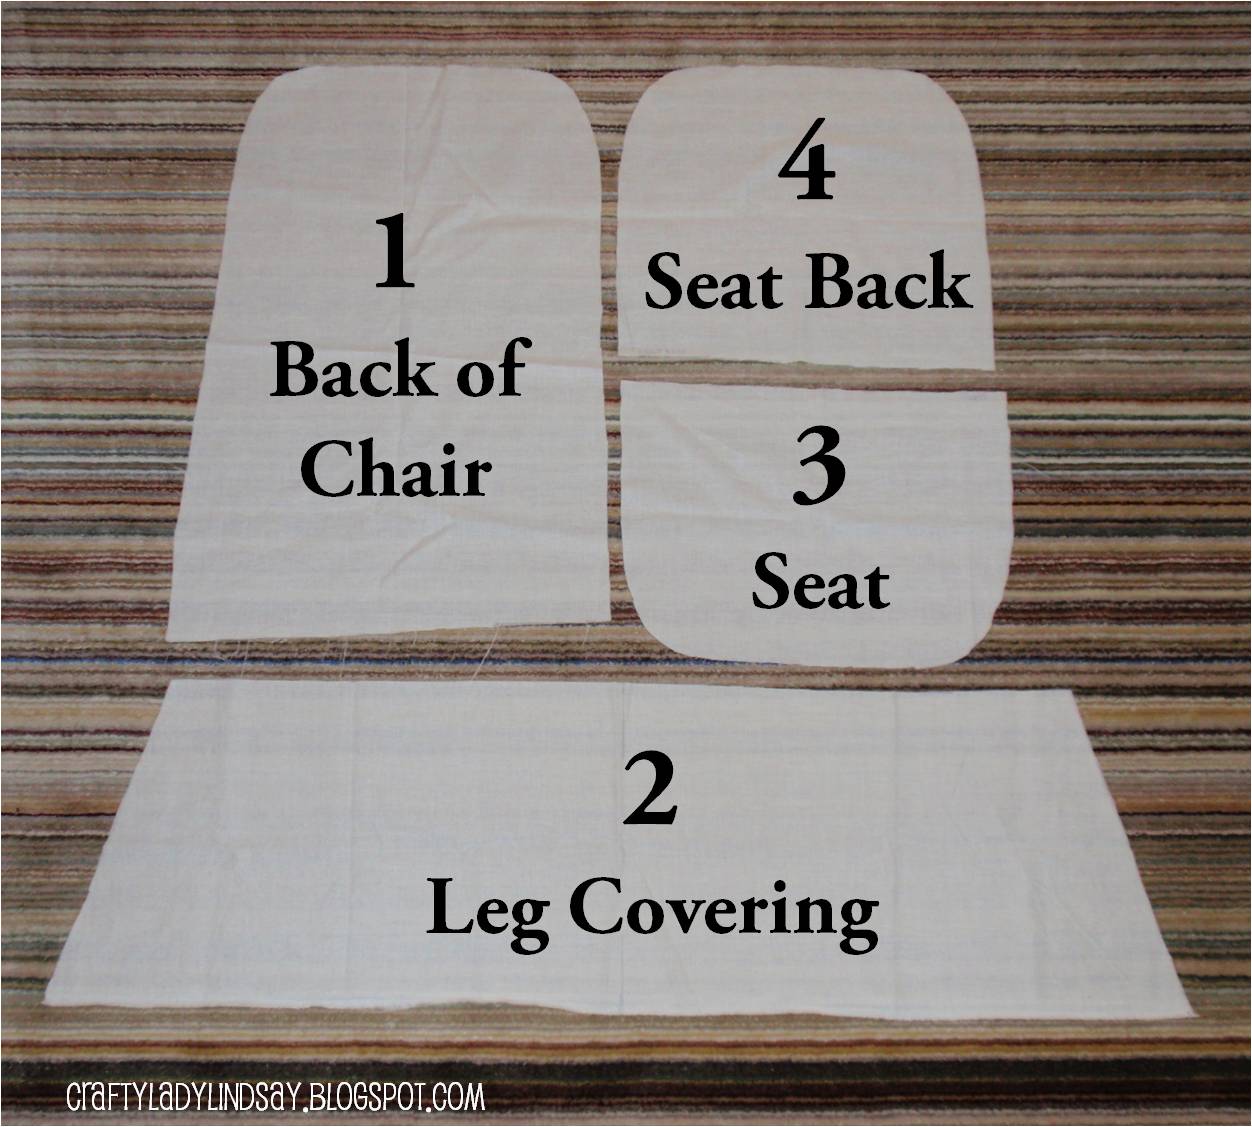 Diary of a Crafty Lady: Slipcovers for Toddler Chairs - with tutorial